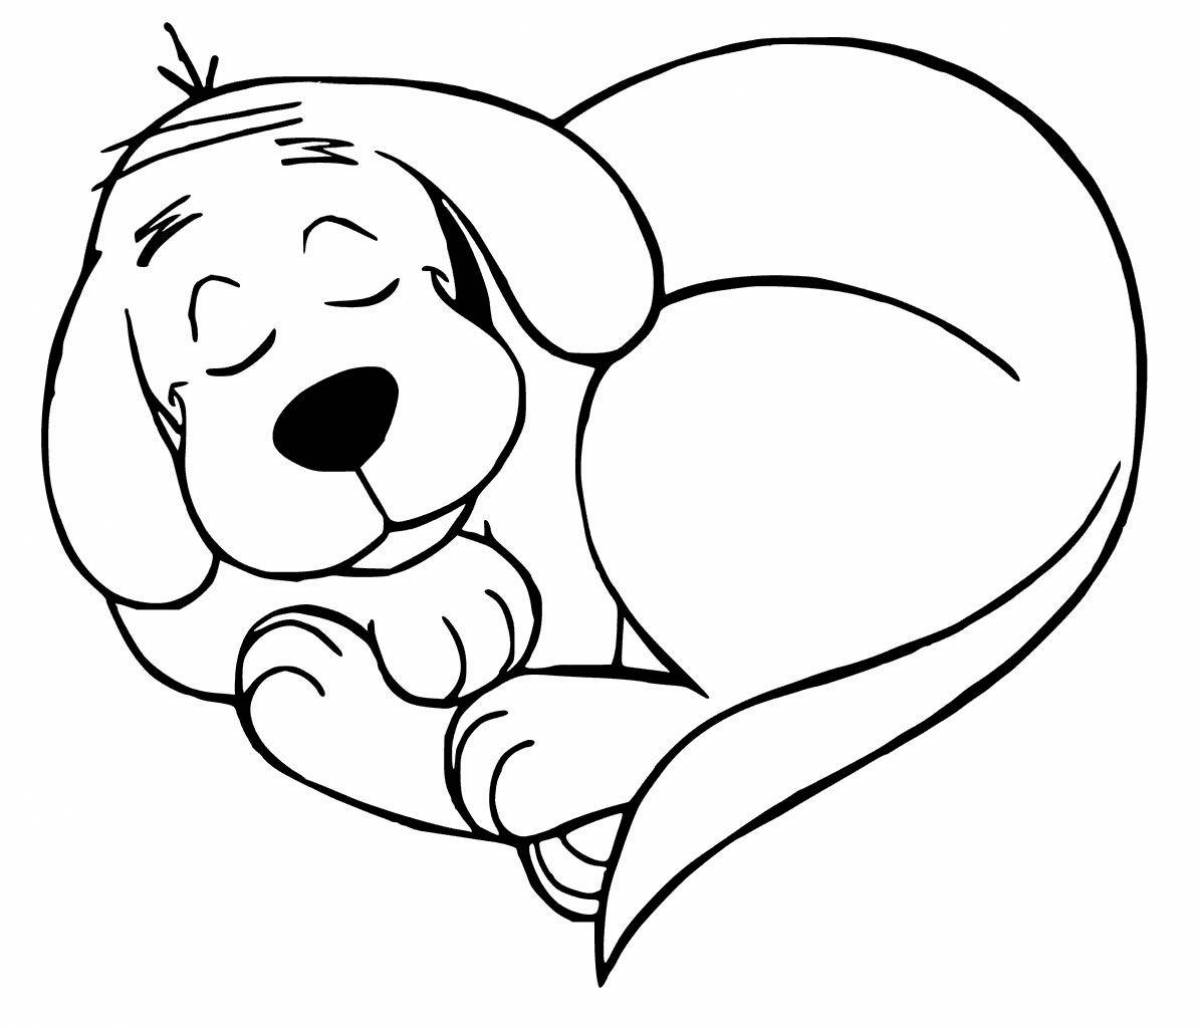 Excited dog coloring book for kids